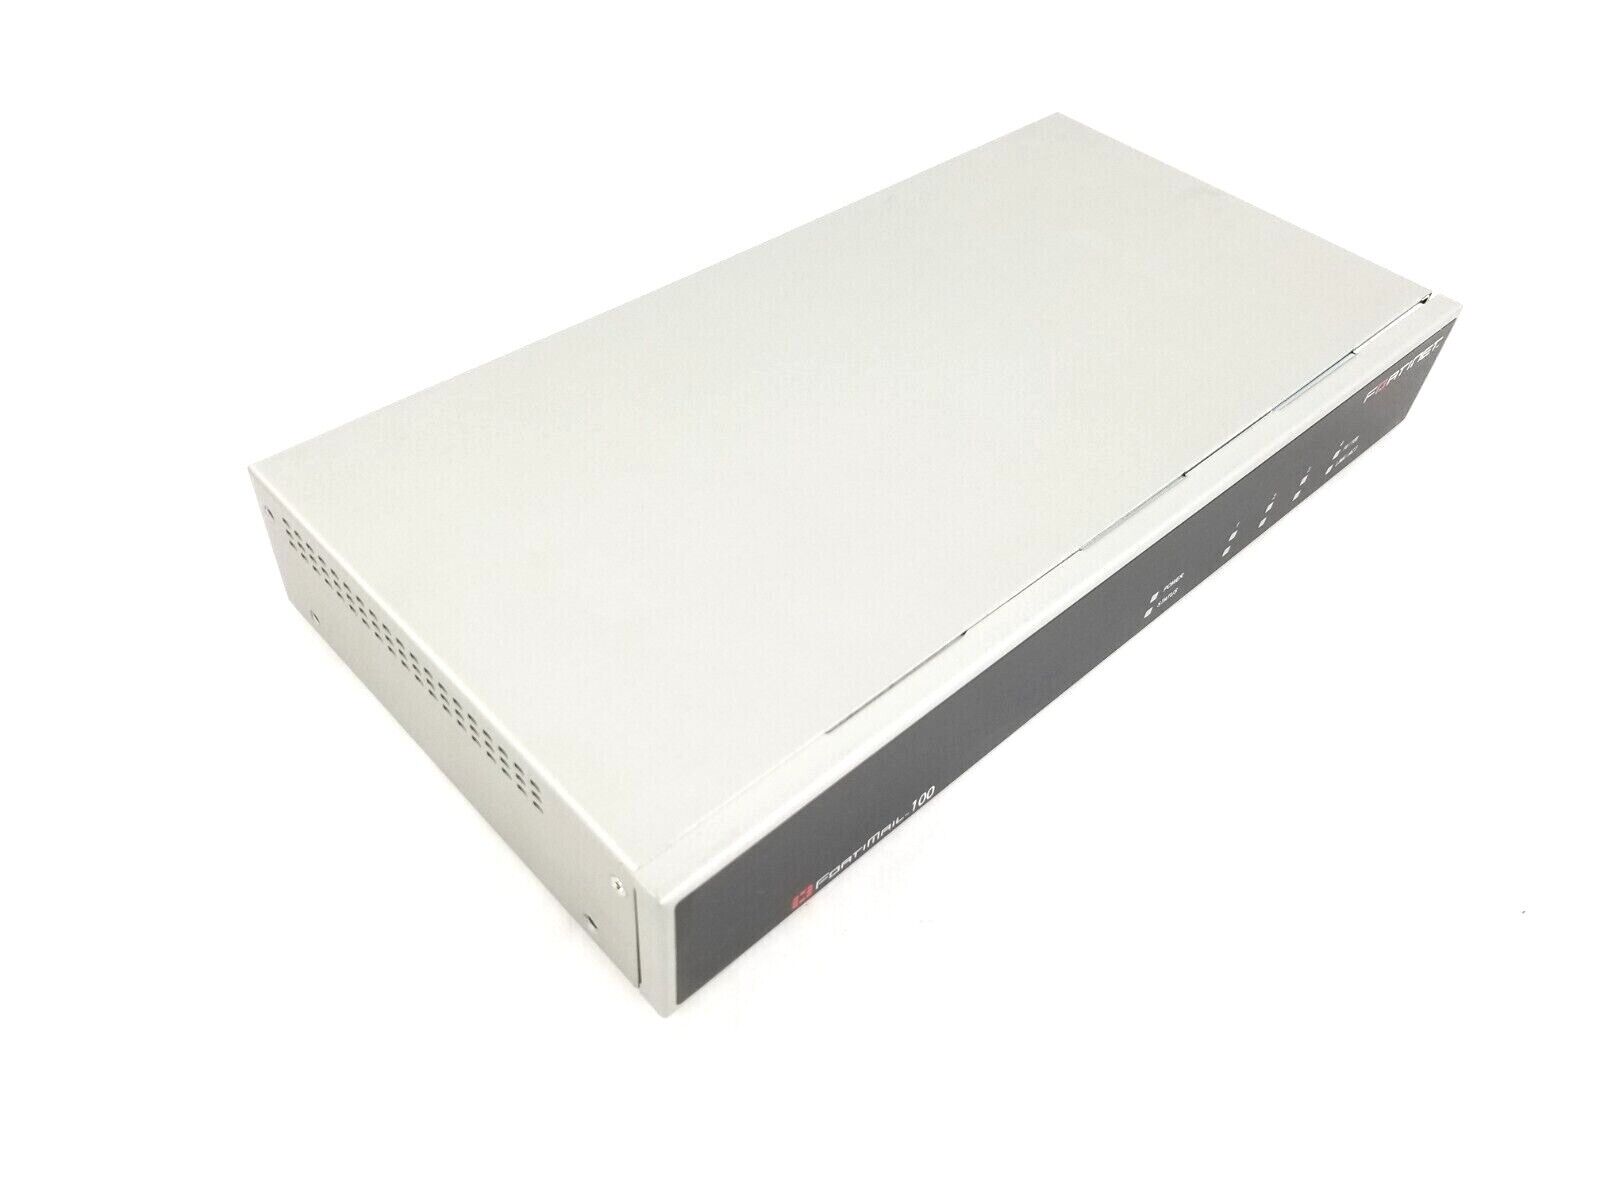 Fortinet FortiMail-100 FML-100 Security Appliance With AC Adapter